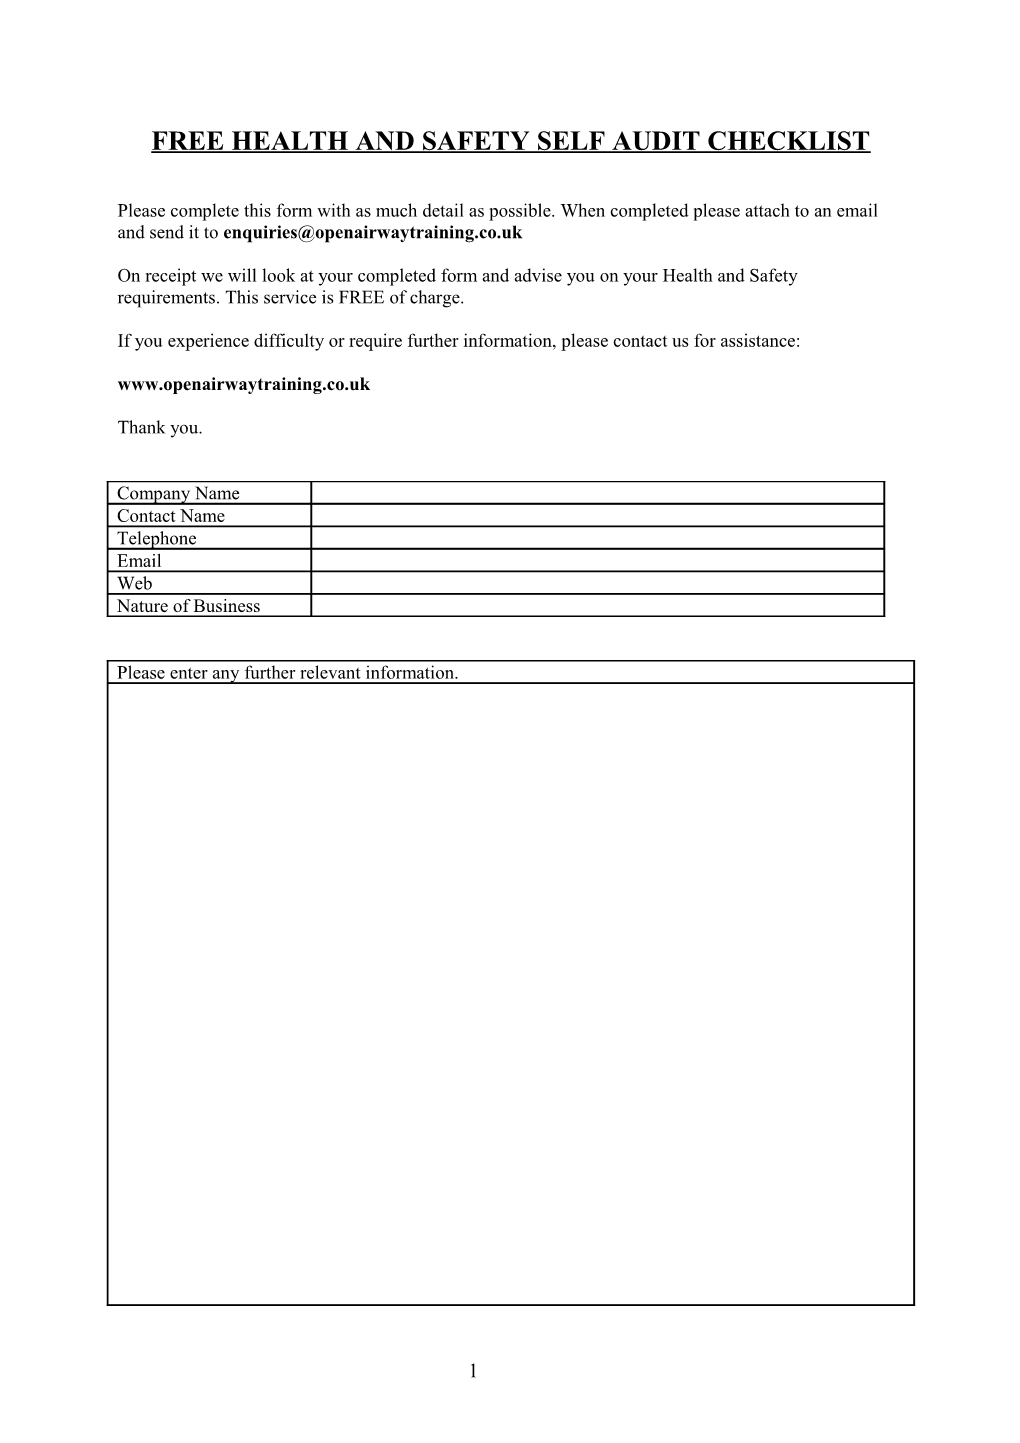 Health and Safety Self Audit Checklist